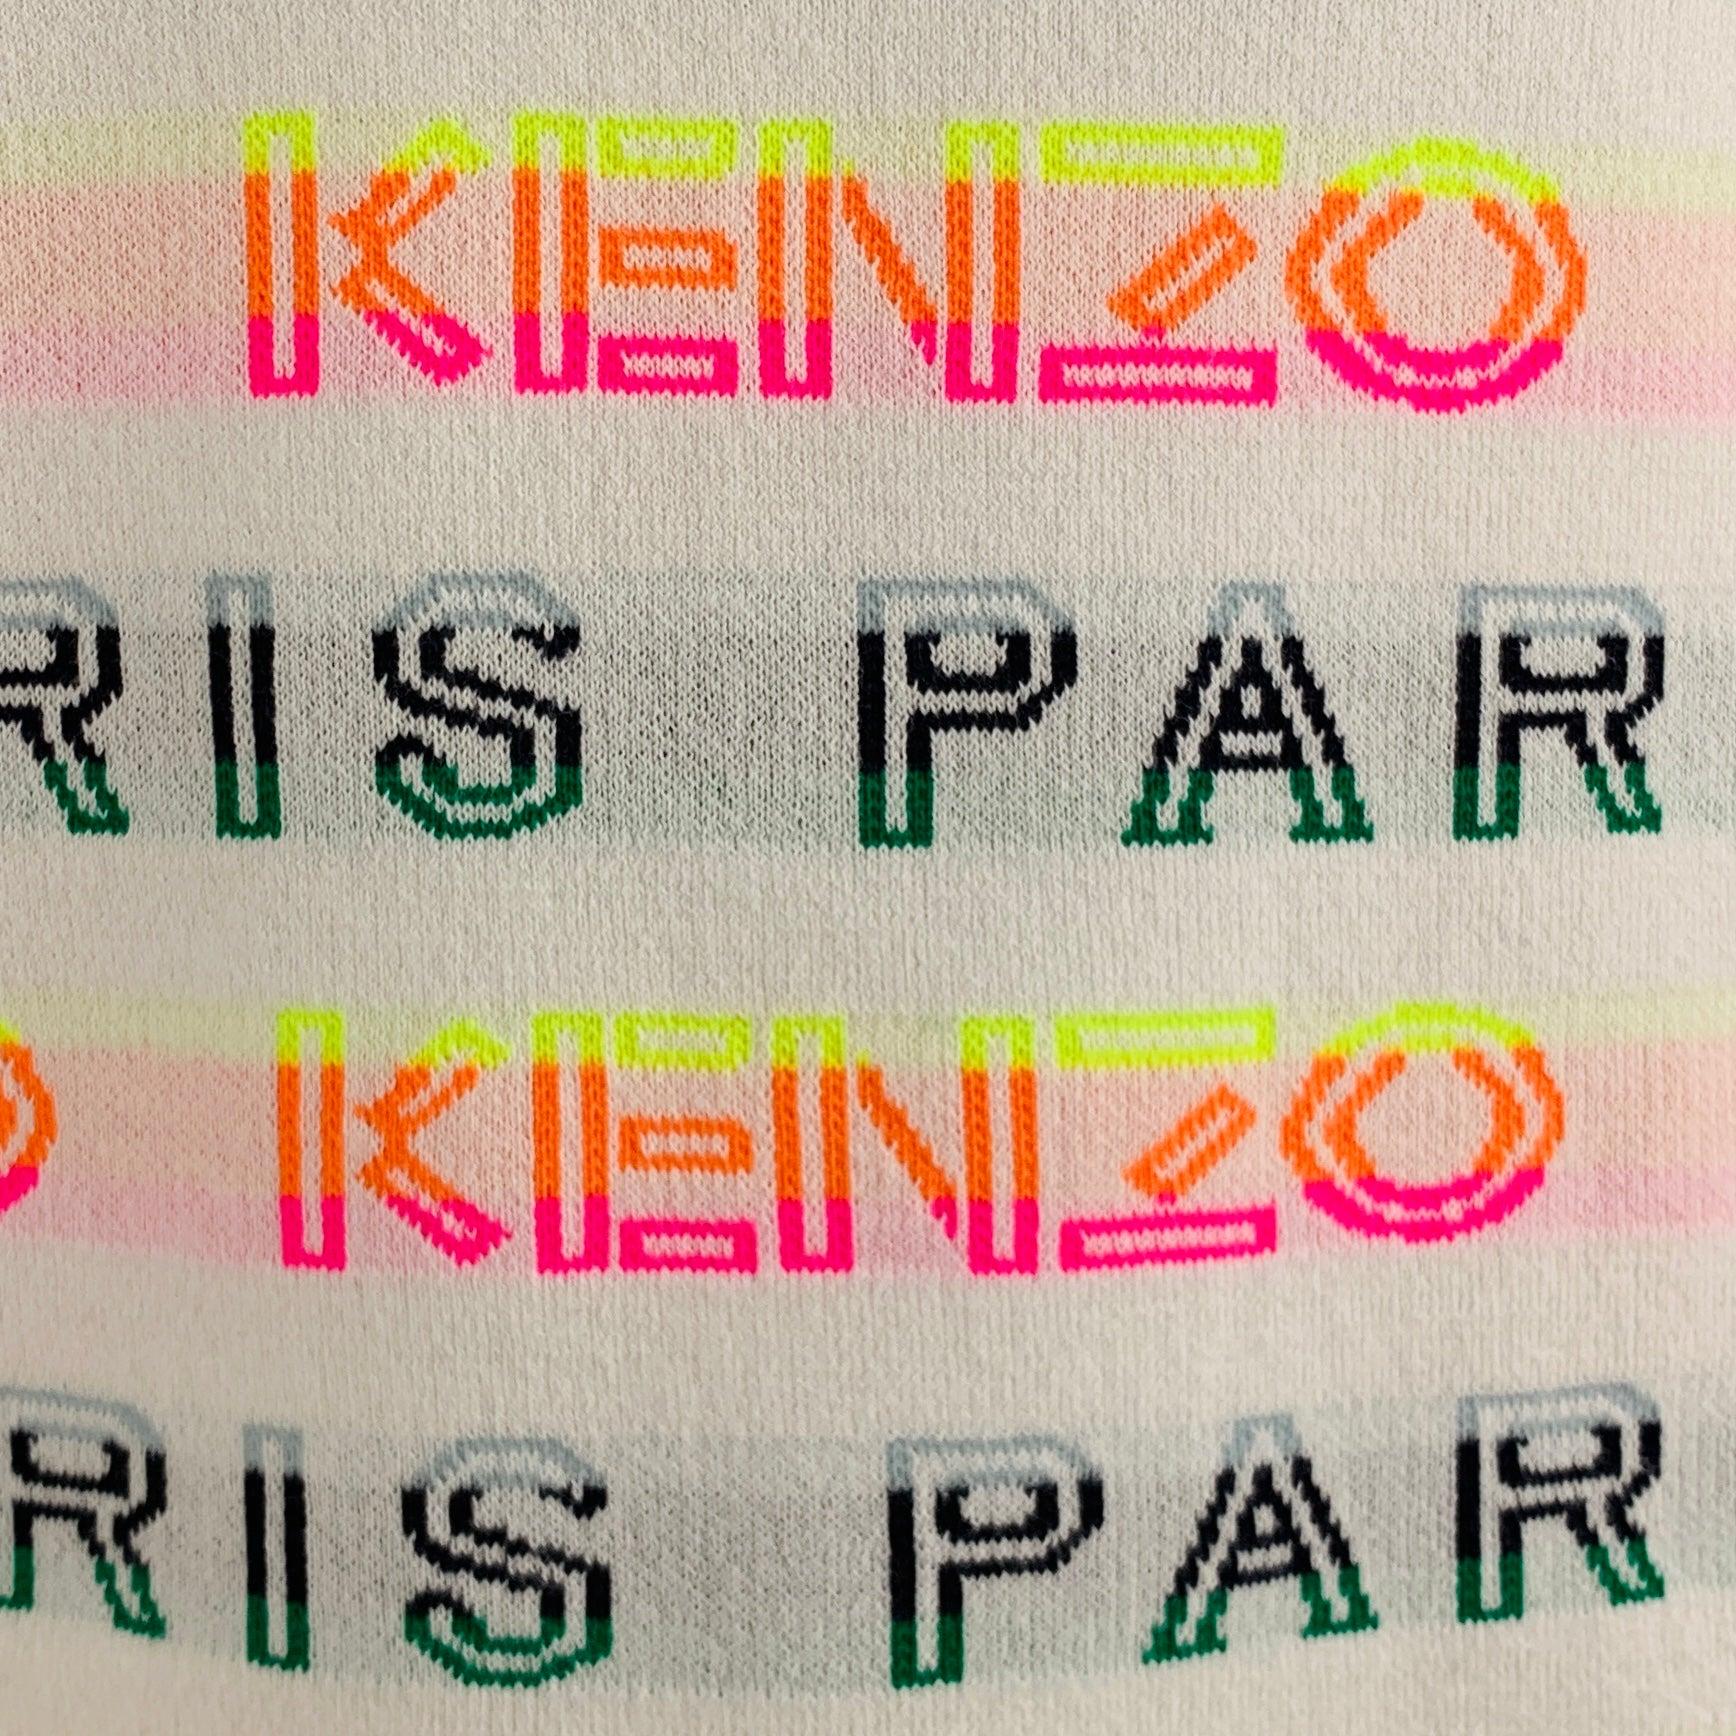 KENZO pullover
in a white cotton blend knit featuring multi-color logo pattern, short sleeves with orange and black trim, and ribbed hem, cuffs, and collar.Very Good Pre-Owned Condition. Minor signs of wear. 

Marked:   L 

Measurements: 
